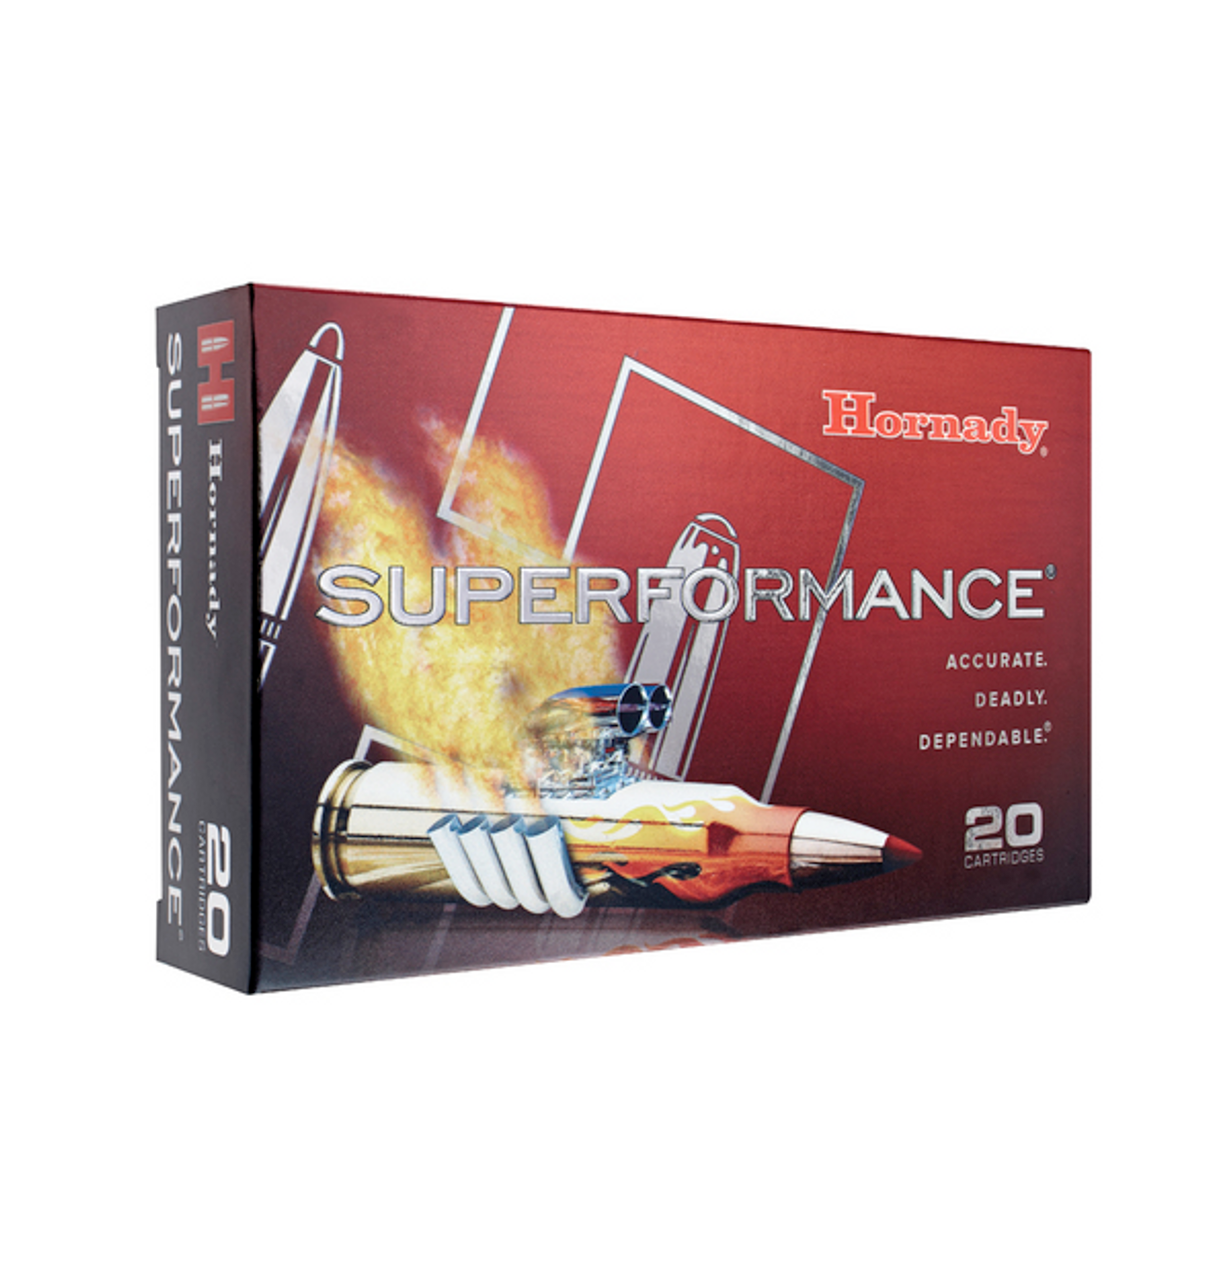 Hornady Superformance Rifle Ammo 300 WIN, SST, 180 Grains, 3130 fps, 20 Rnds